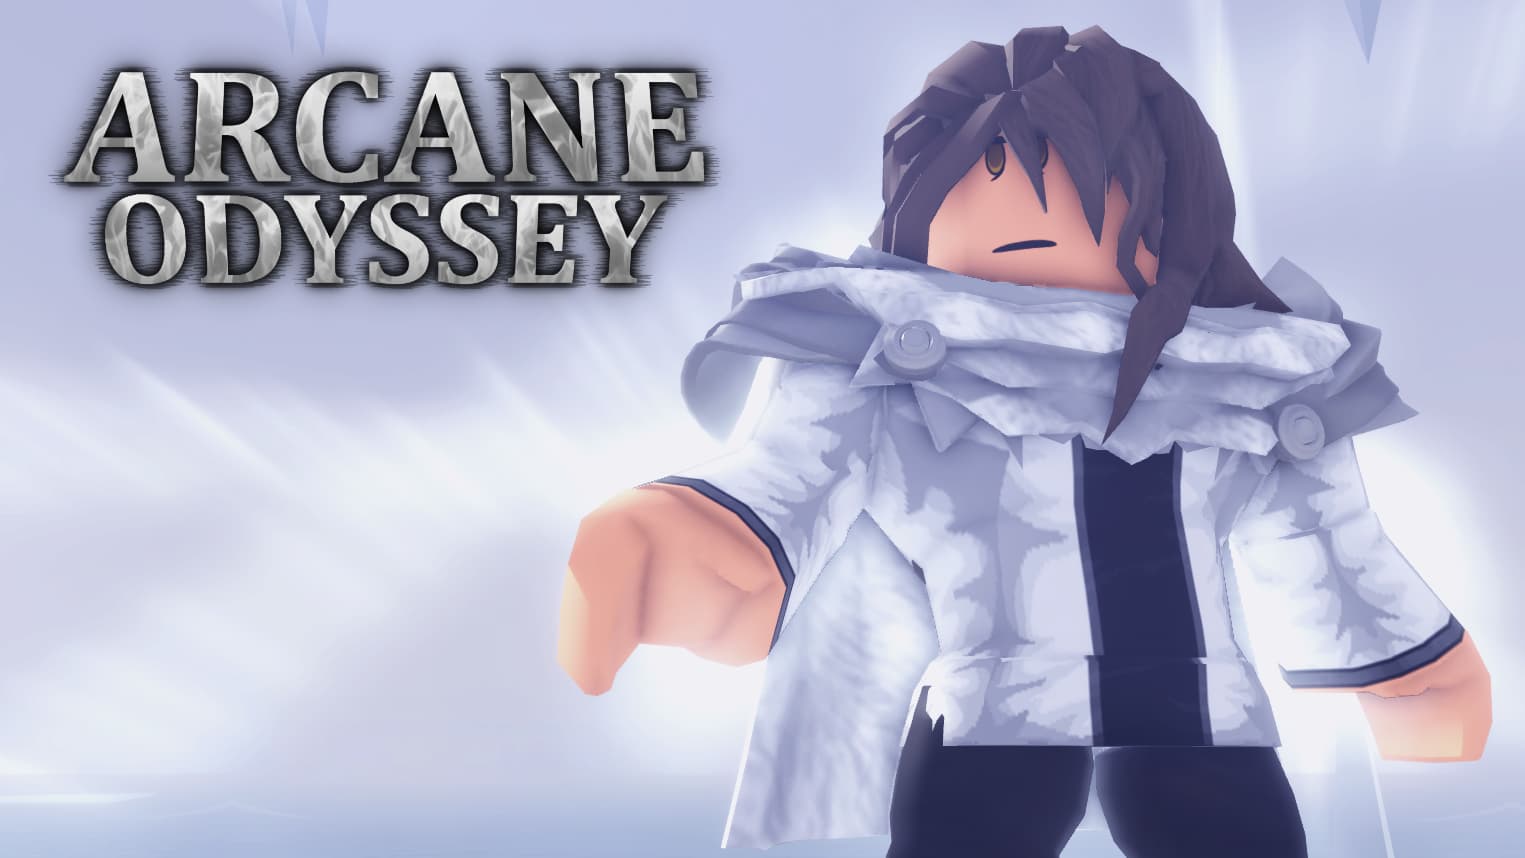 vetex on X: Arcane Odyssey Links: - Trello (Daily patch notes, planned  features, to-do lists)  - Patreon (More in-depth  showcases of the game):  - Discord:   - Forum